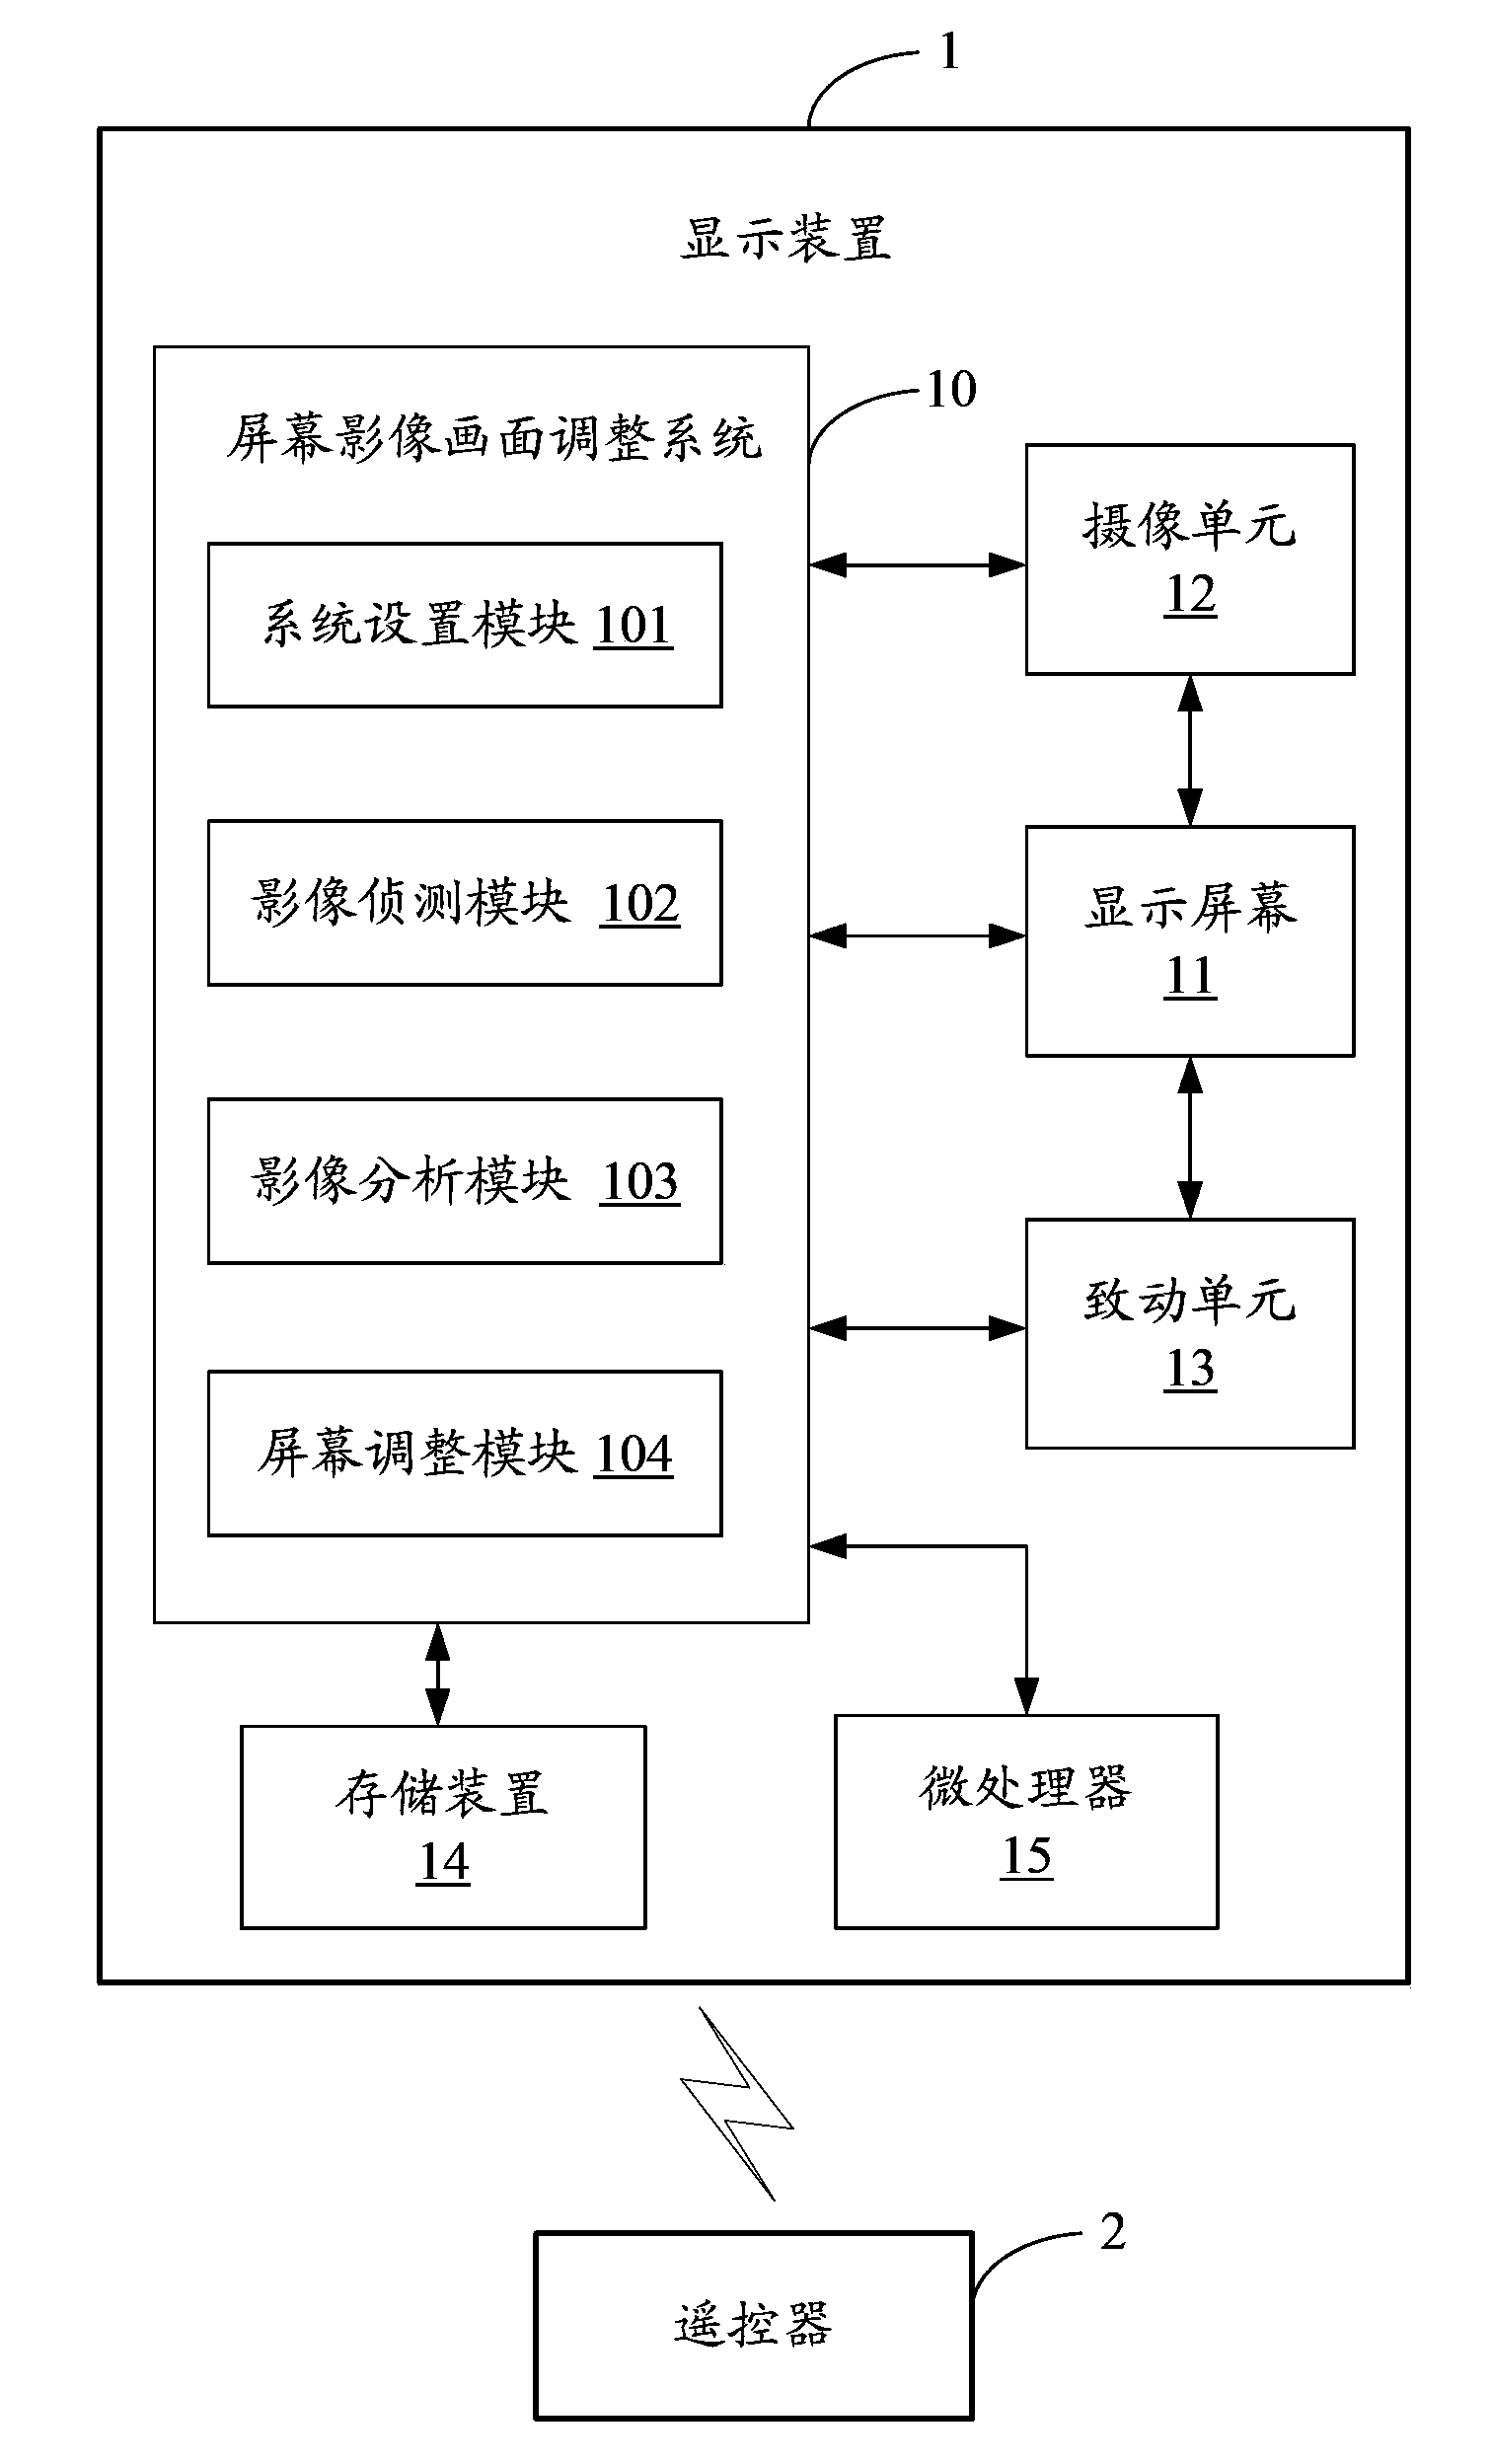 Screen video image adjusting system and method